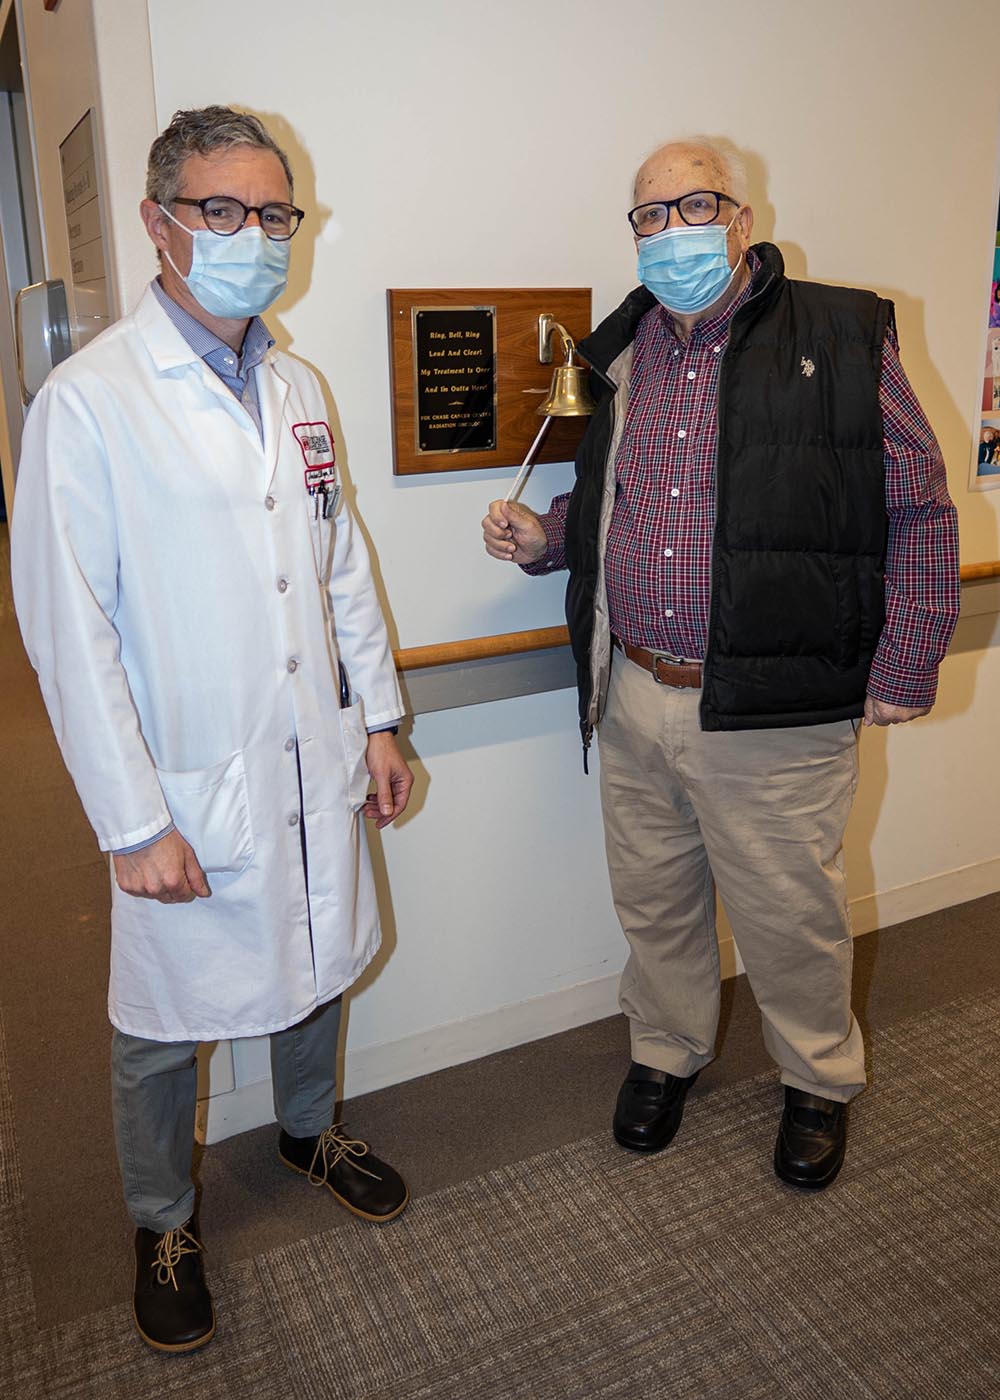 Rodney ringing the bell on his last day of radiation treatment, standing with his radiation oncologist, Dr. Joshua Meyer.